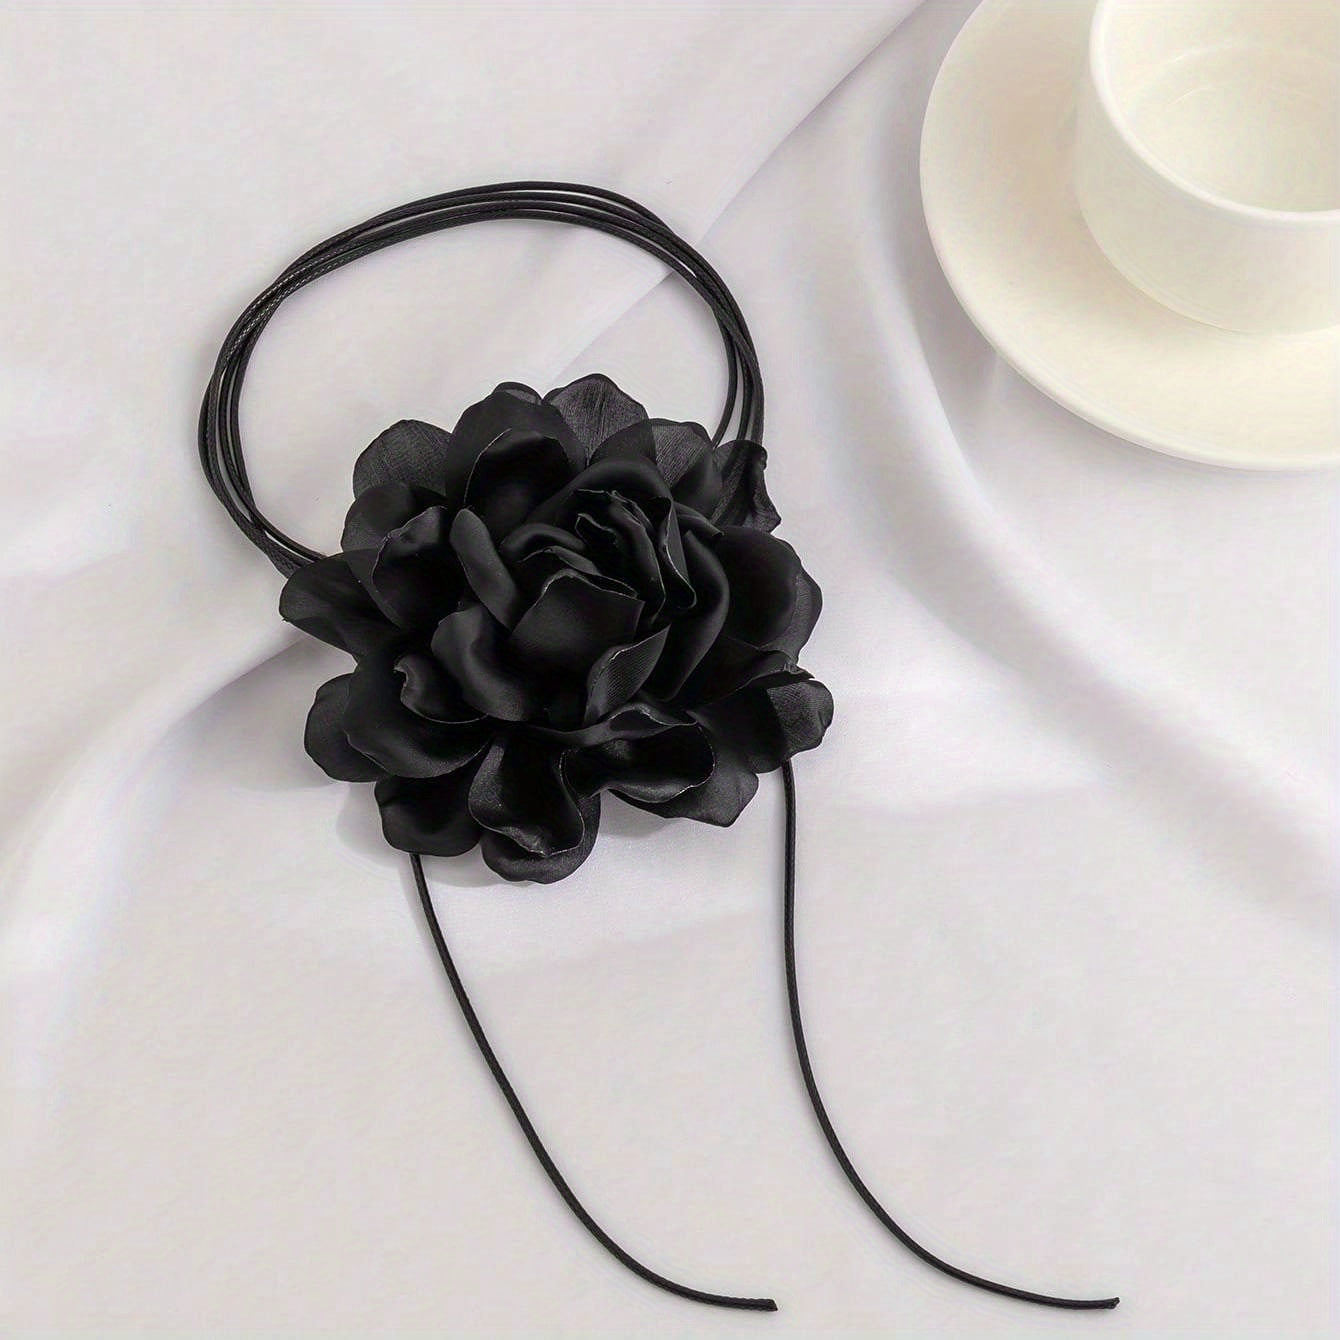 Elegant French Vintage Flower Necklace - Romantic Long Strap Design with Wax Cord